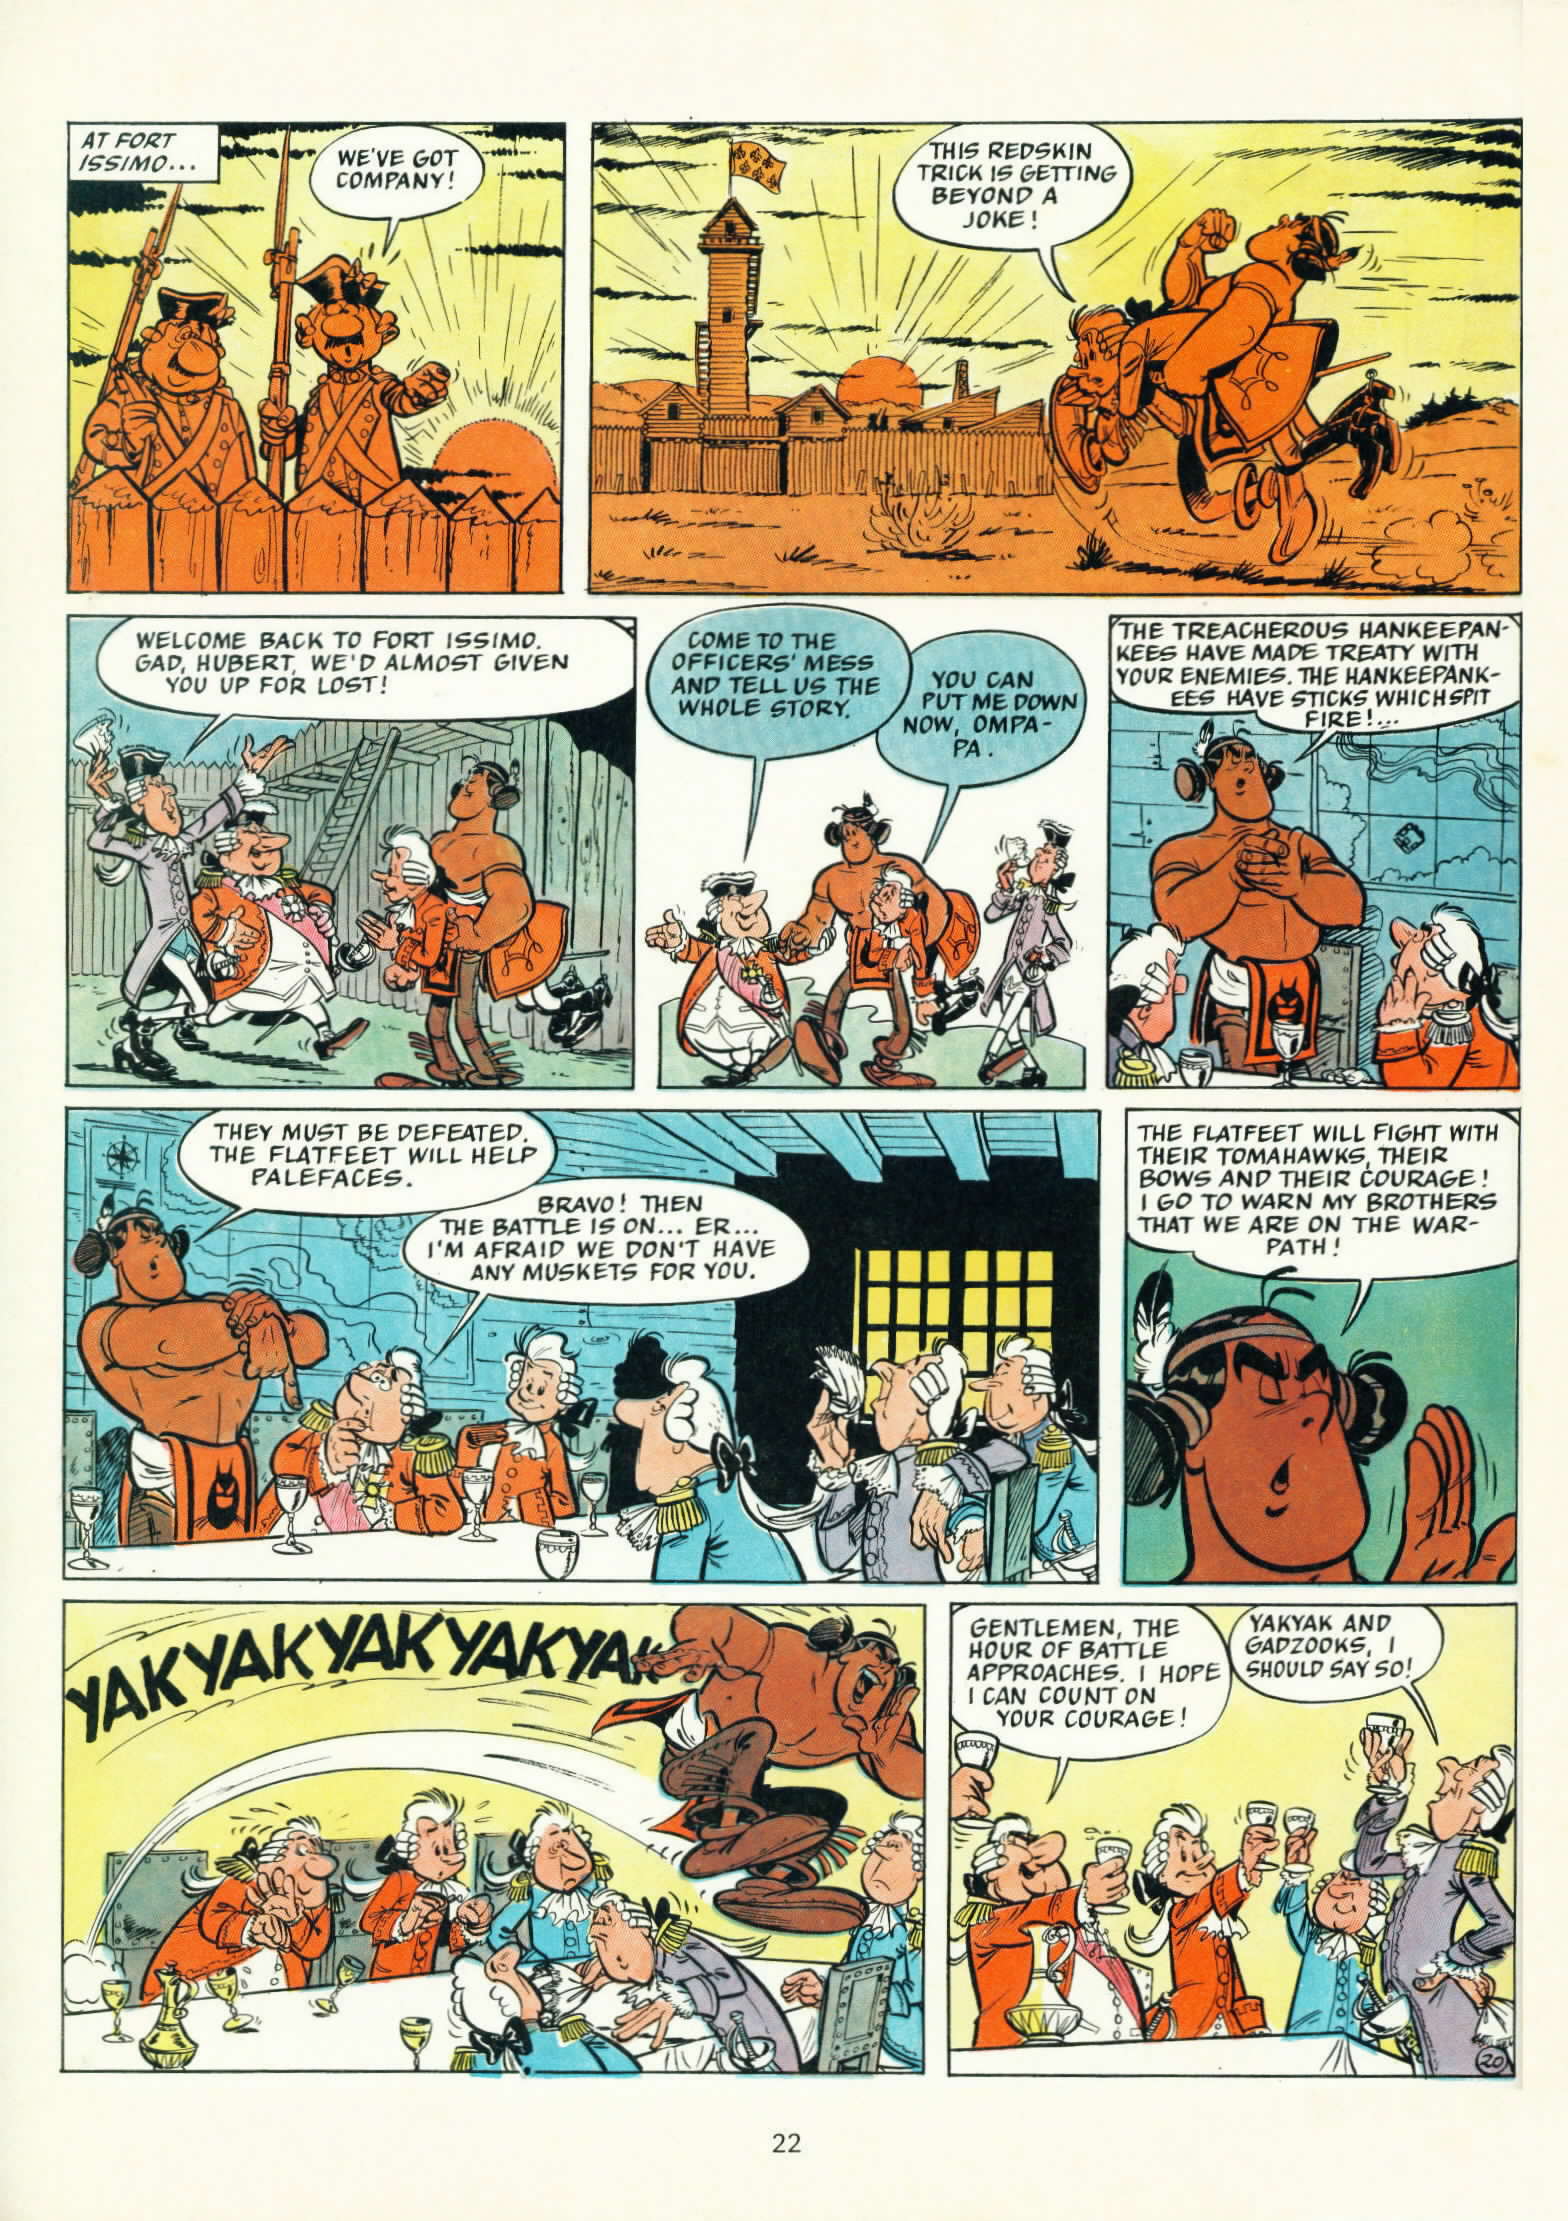 Read online Ompa-pa the Redskin comic -  Issue #5 - 23